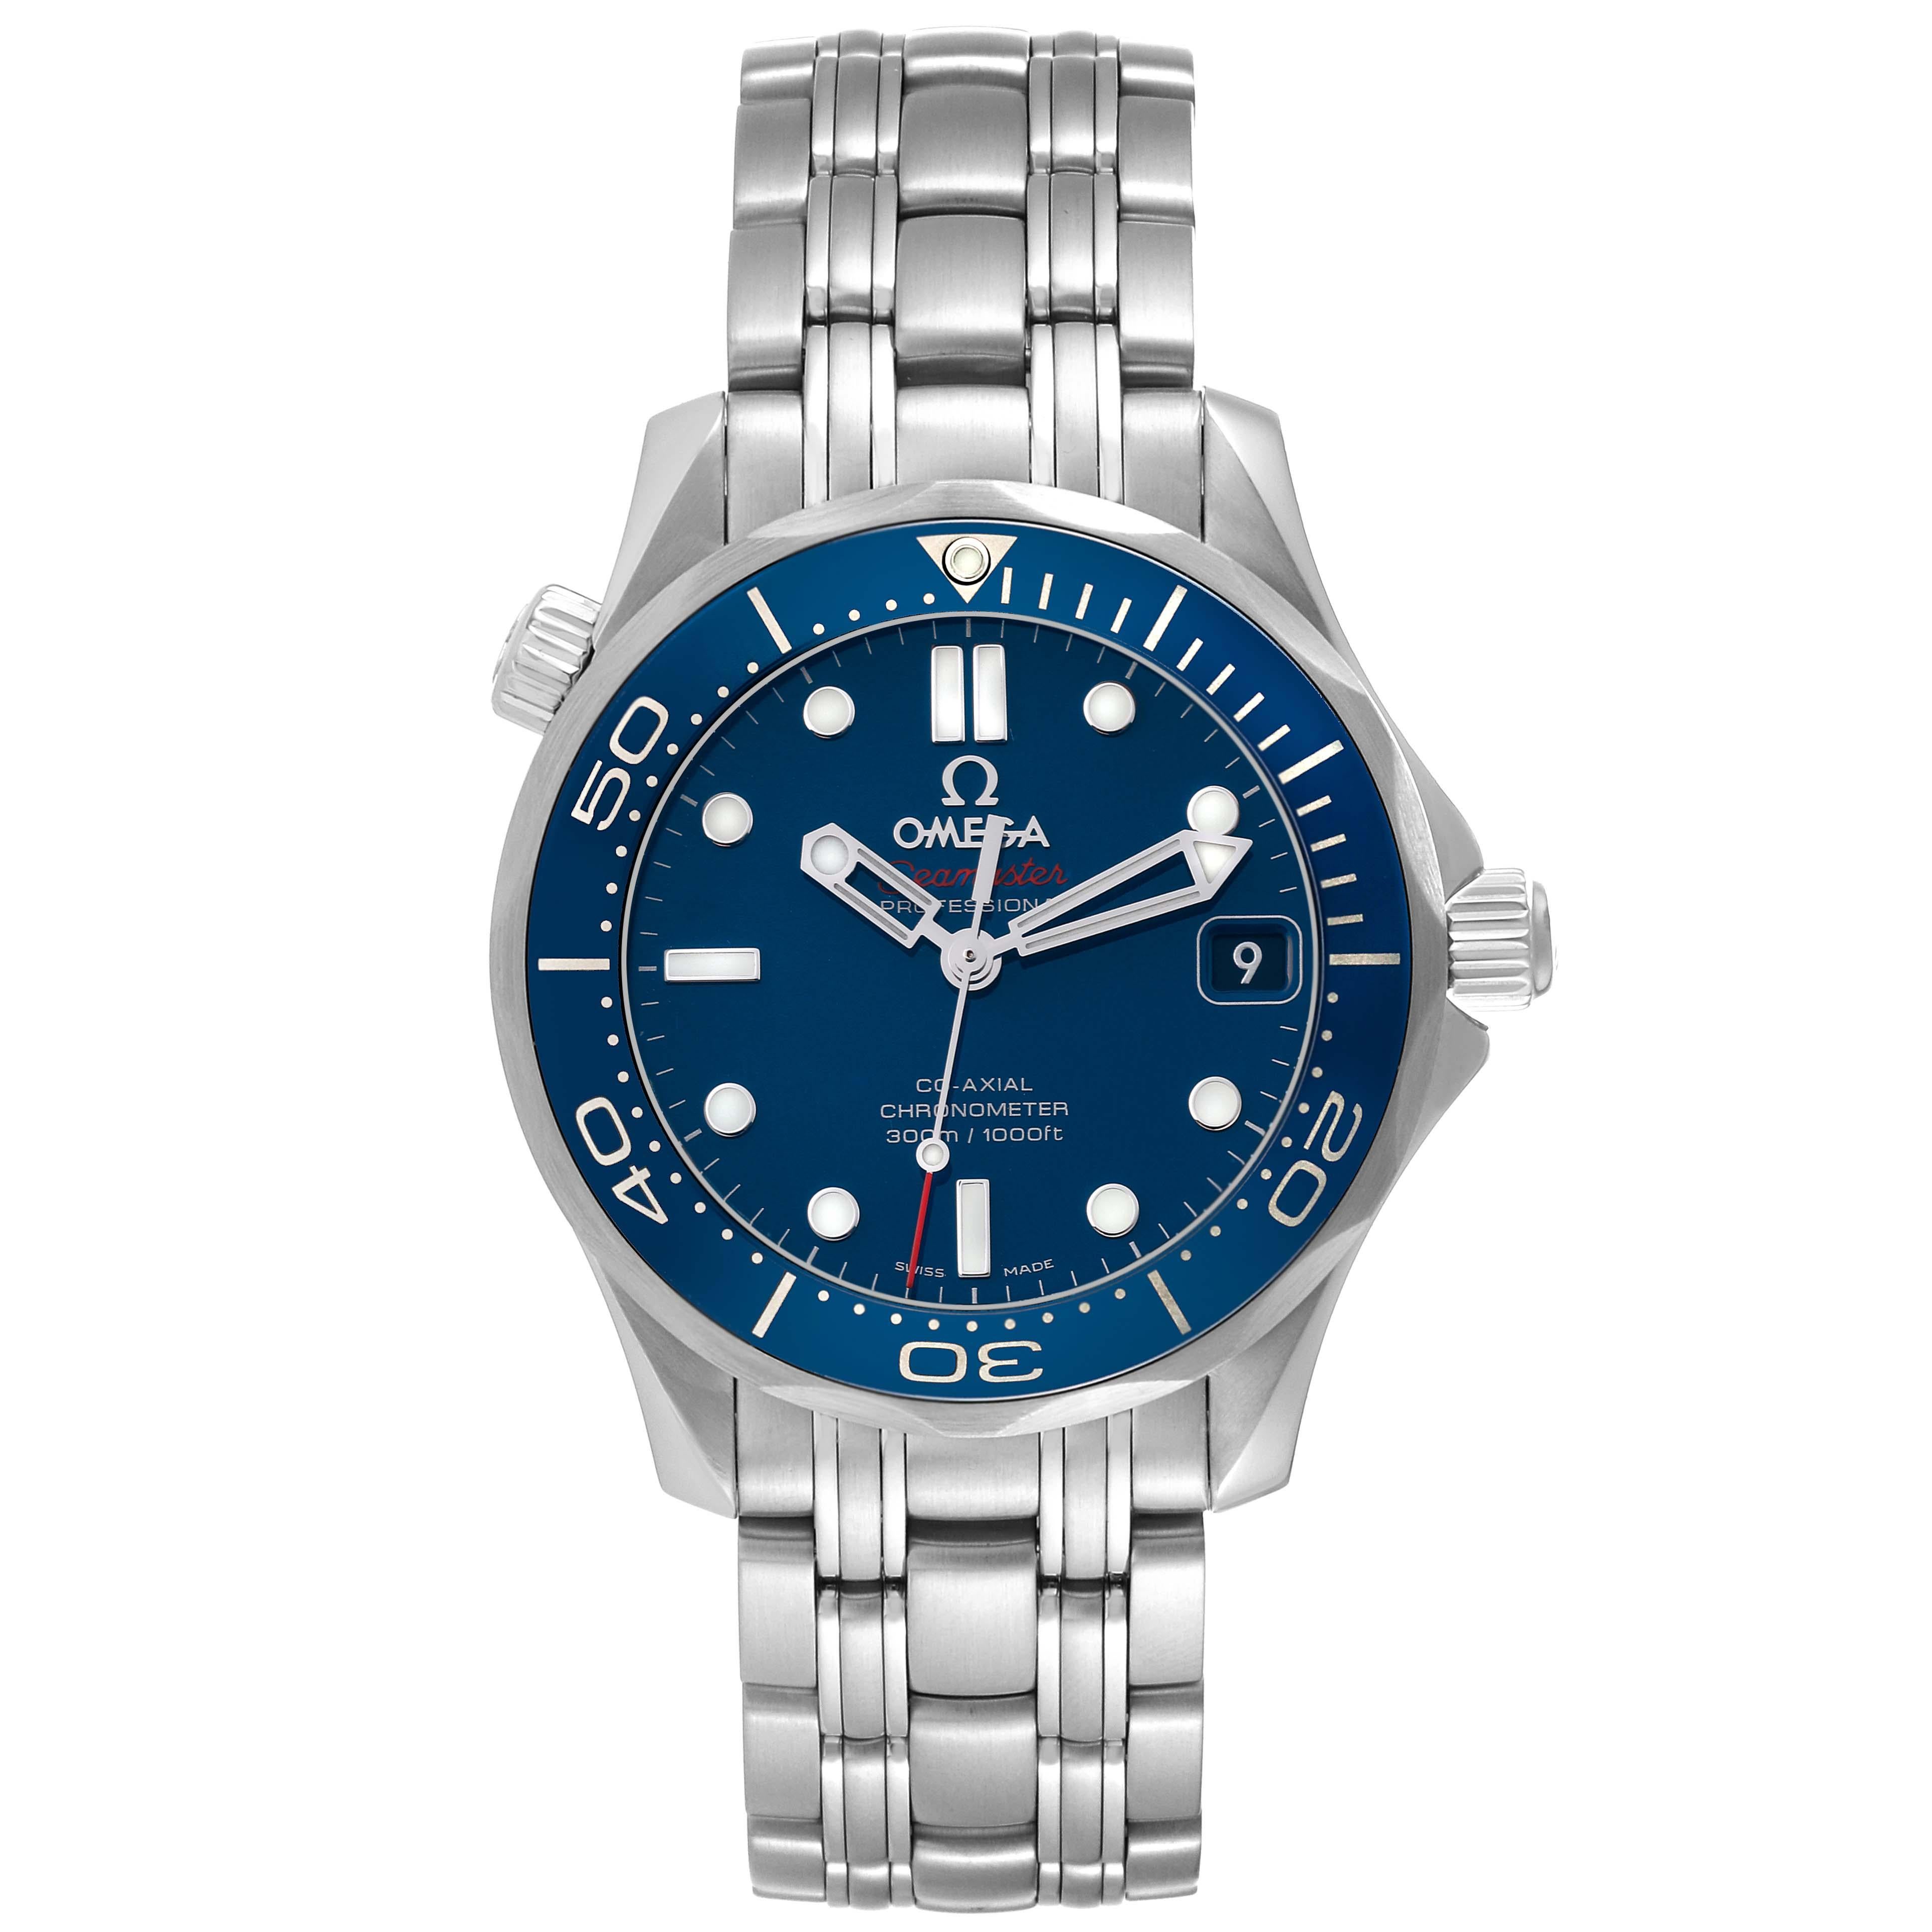 Omega Seamaster Diver 300M Midsize Steel Mens Watch 212.30.36.20.03.001 Box Card. Automatic chronometer, Co-Axial Escapement movement with rhodium-plated finish. Stainless steel case 36.25 mm in diameter. Omega logo on the crown. Helium-escape valve